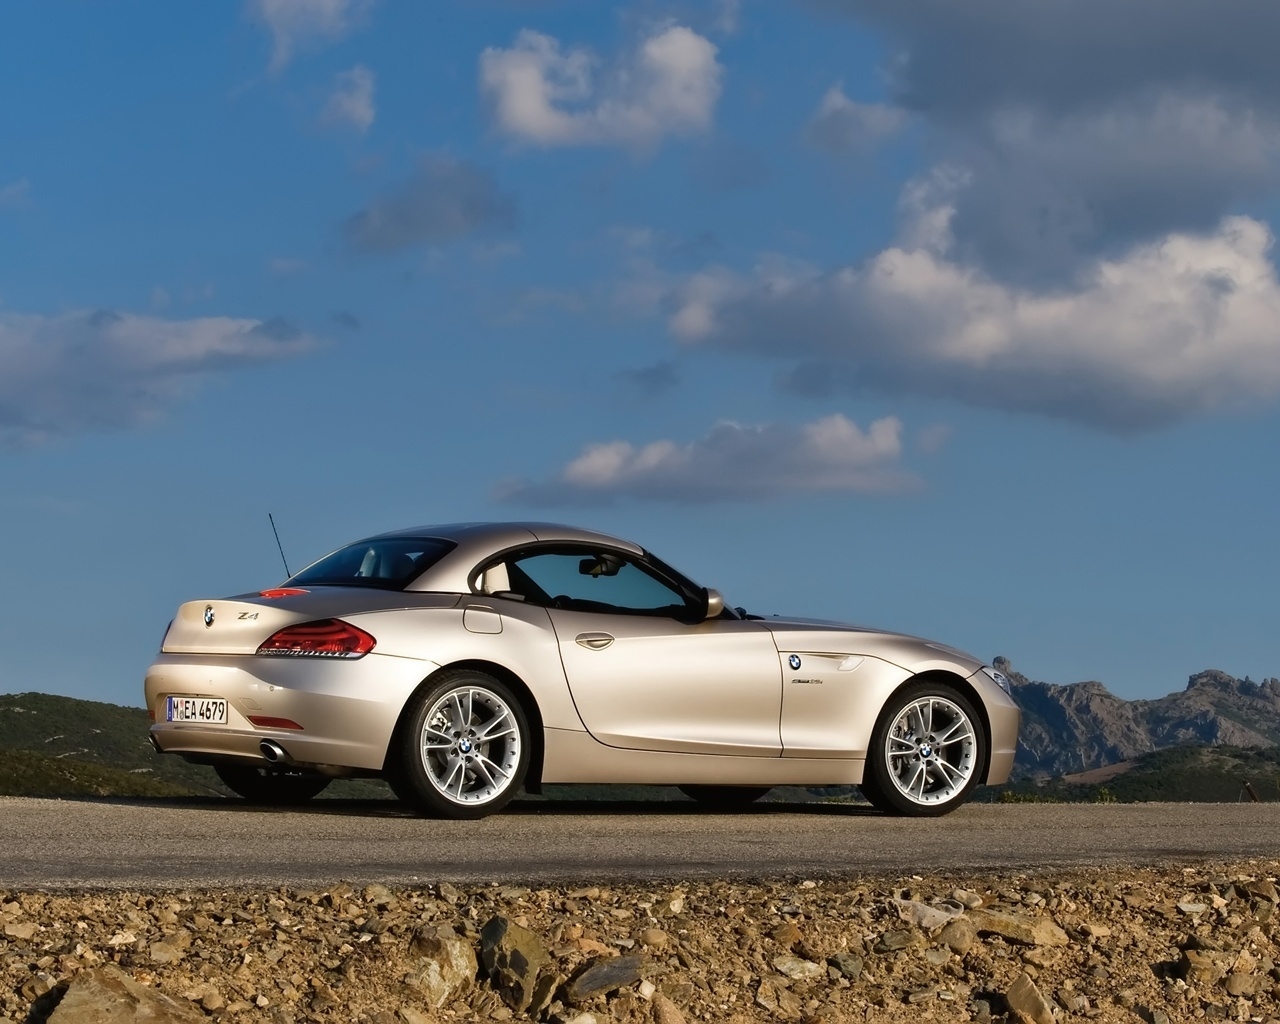 BMW Z4 Roadster Top Up 2009 for 1280 x 1024 resolution